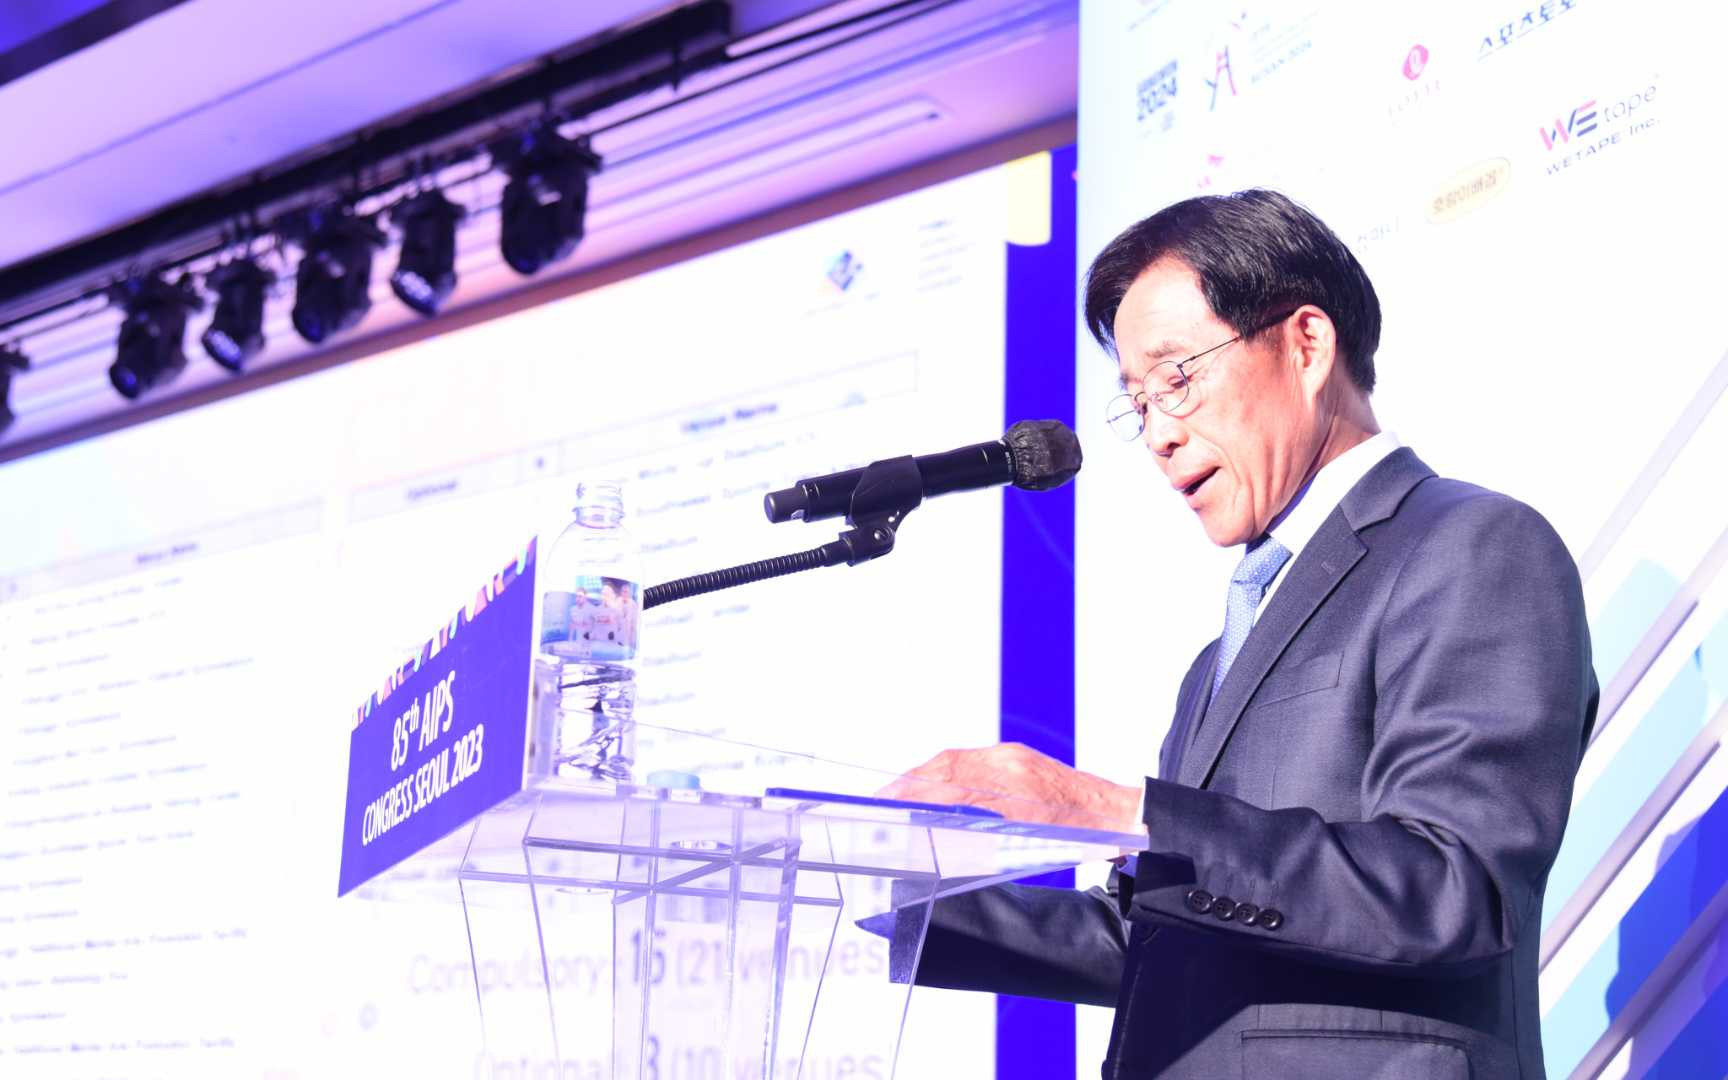 The vice-president of the Chungcheong 2027 Organising Committee Chang Seop Lee gave a presentation on plans for the event to this year's AIPS Congress ©AIPS